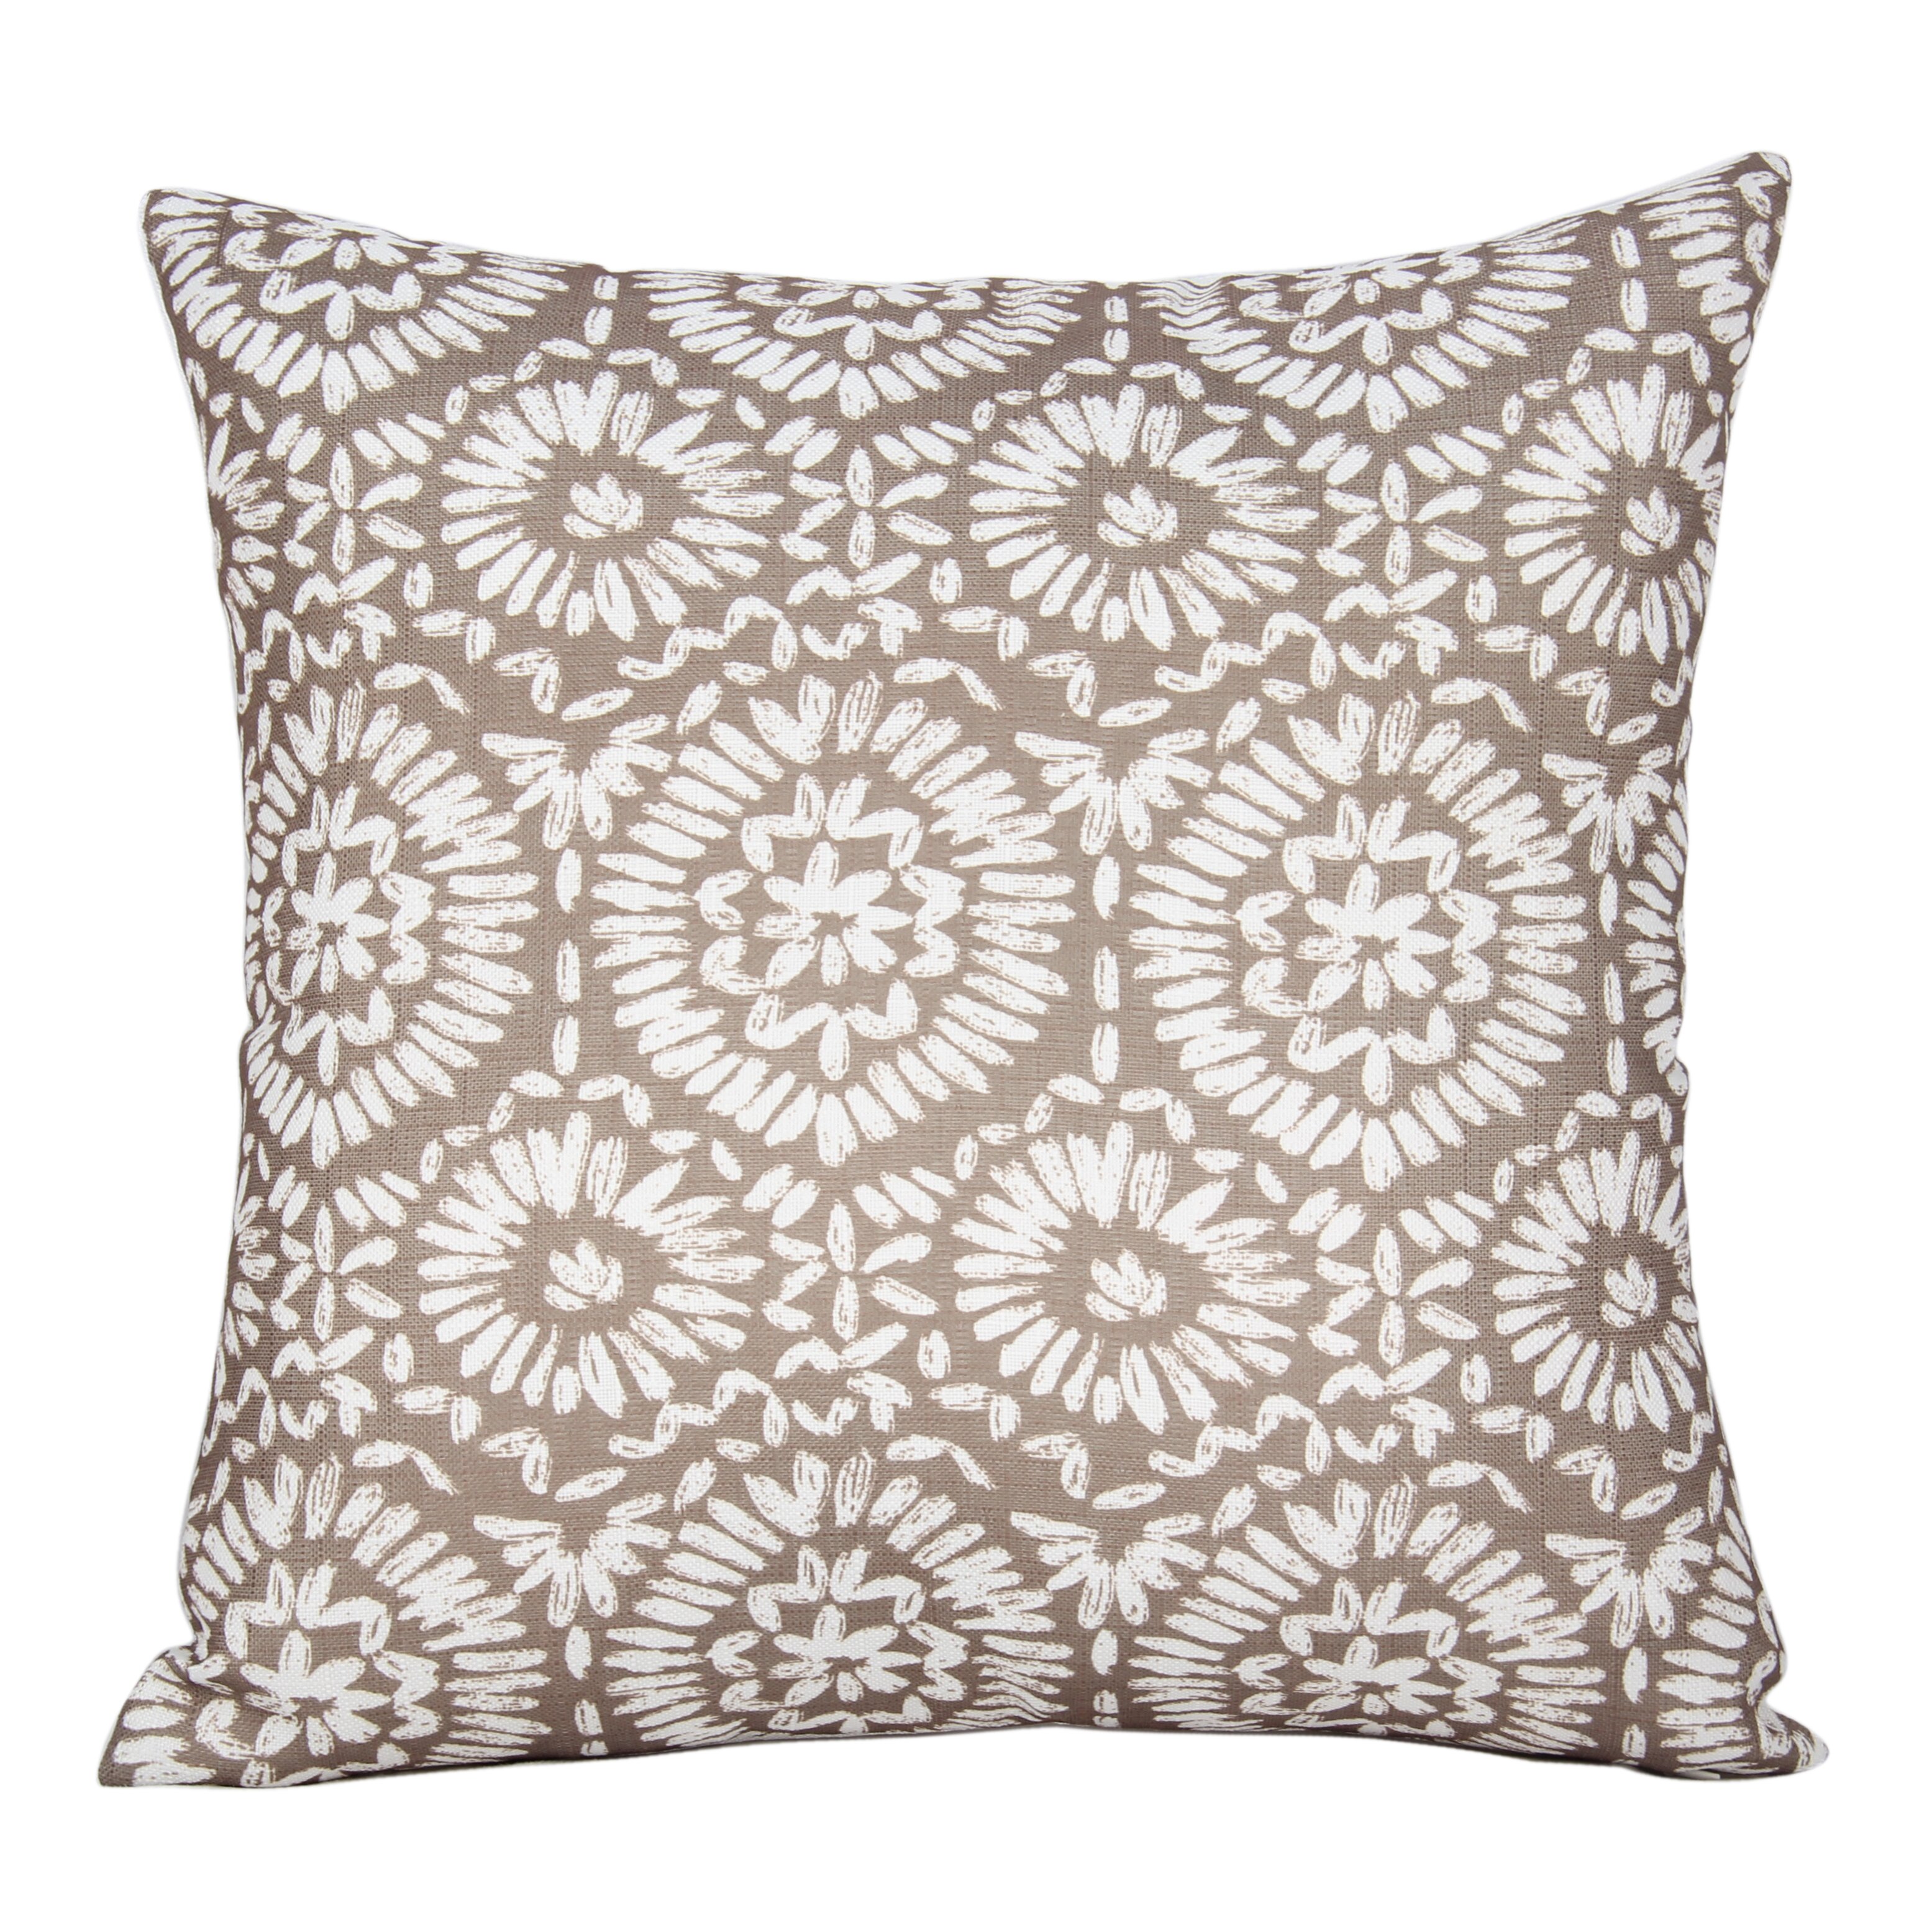 AttractionDesignHome Decorative Throw Pillow Cover & Reviews | Wayfair.ca